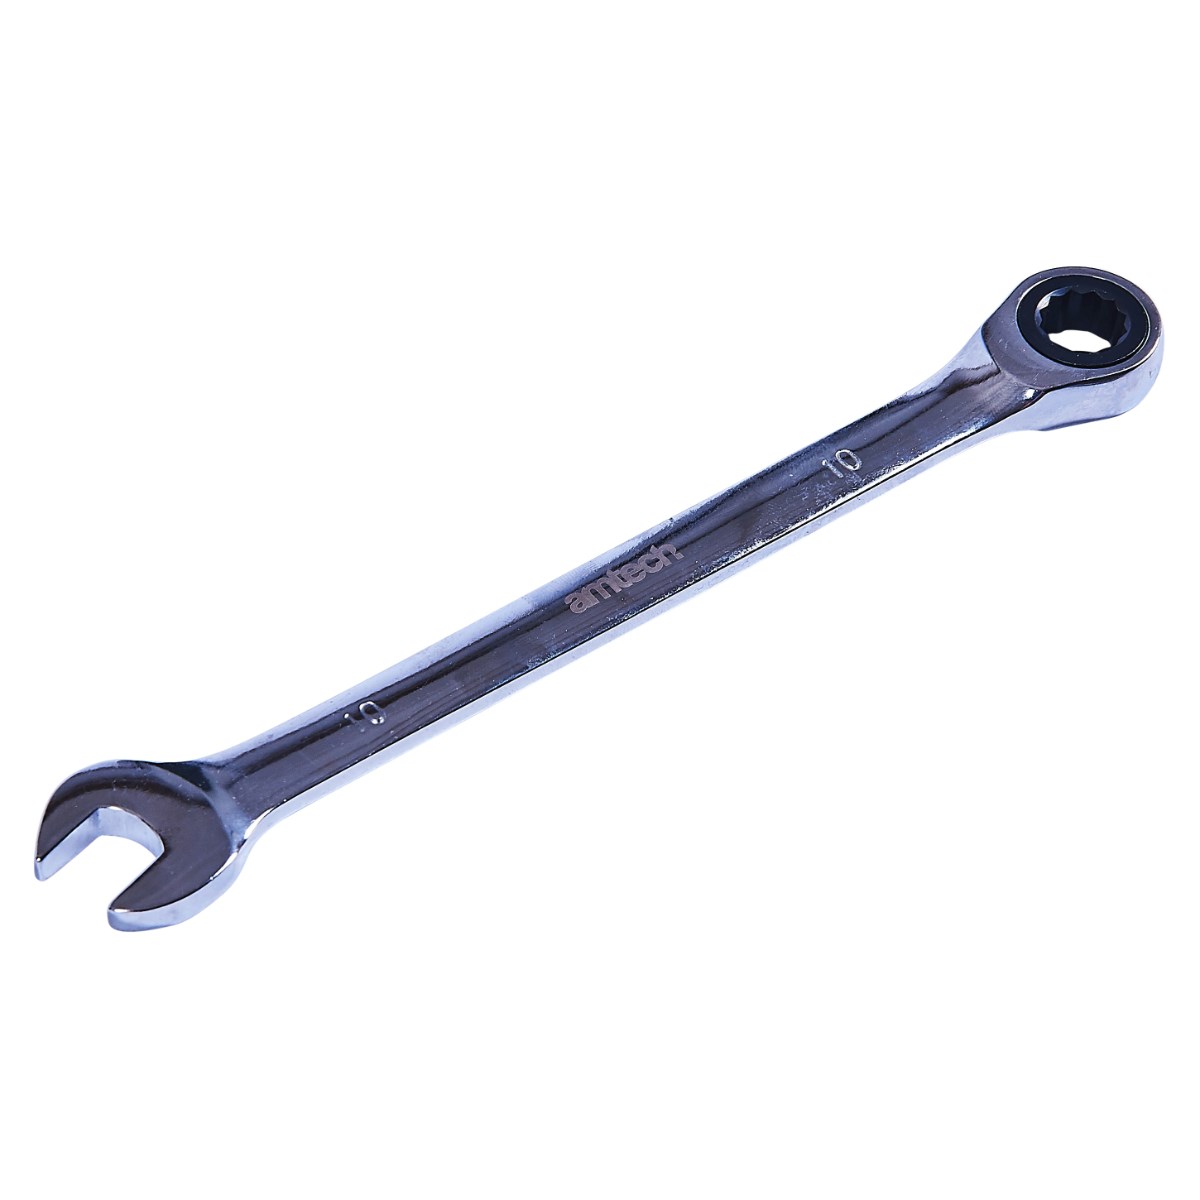 10mm Combination Spanner Ratchet Wrench Open Ring Tool DIY Car Amtech K1680 